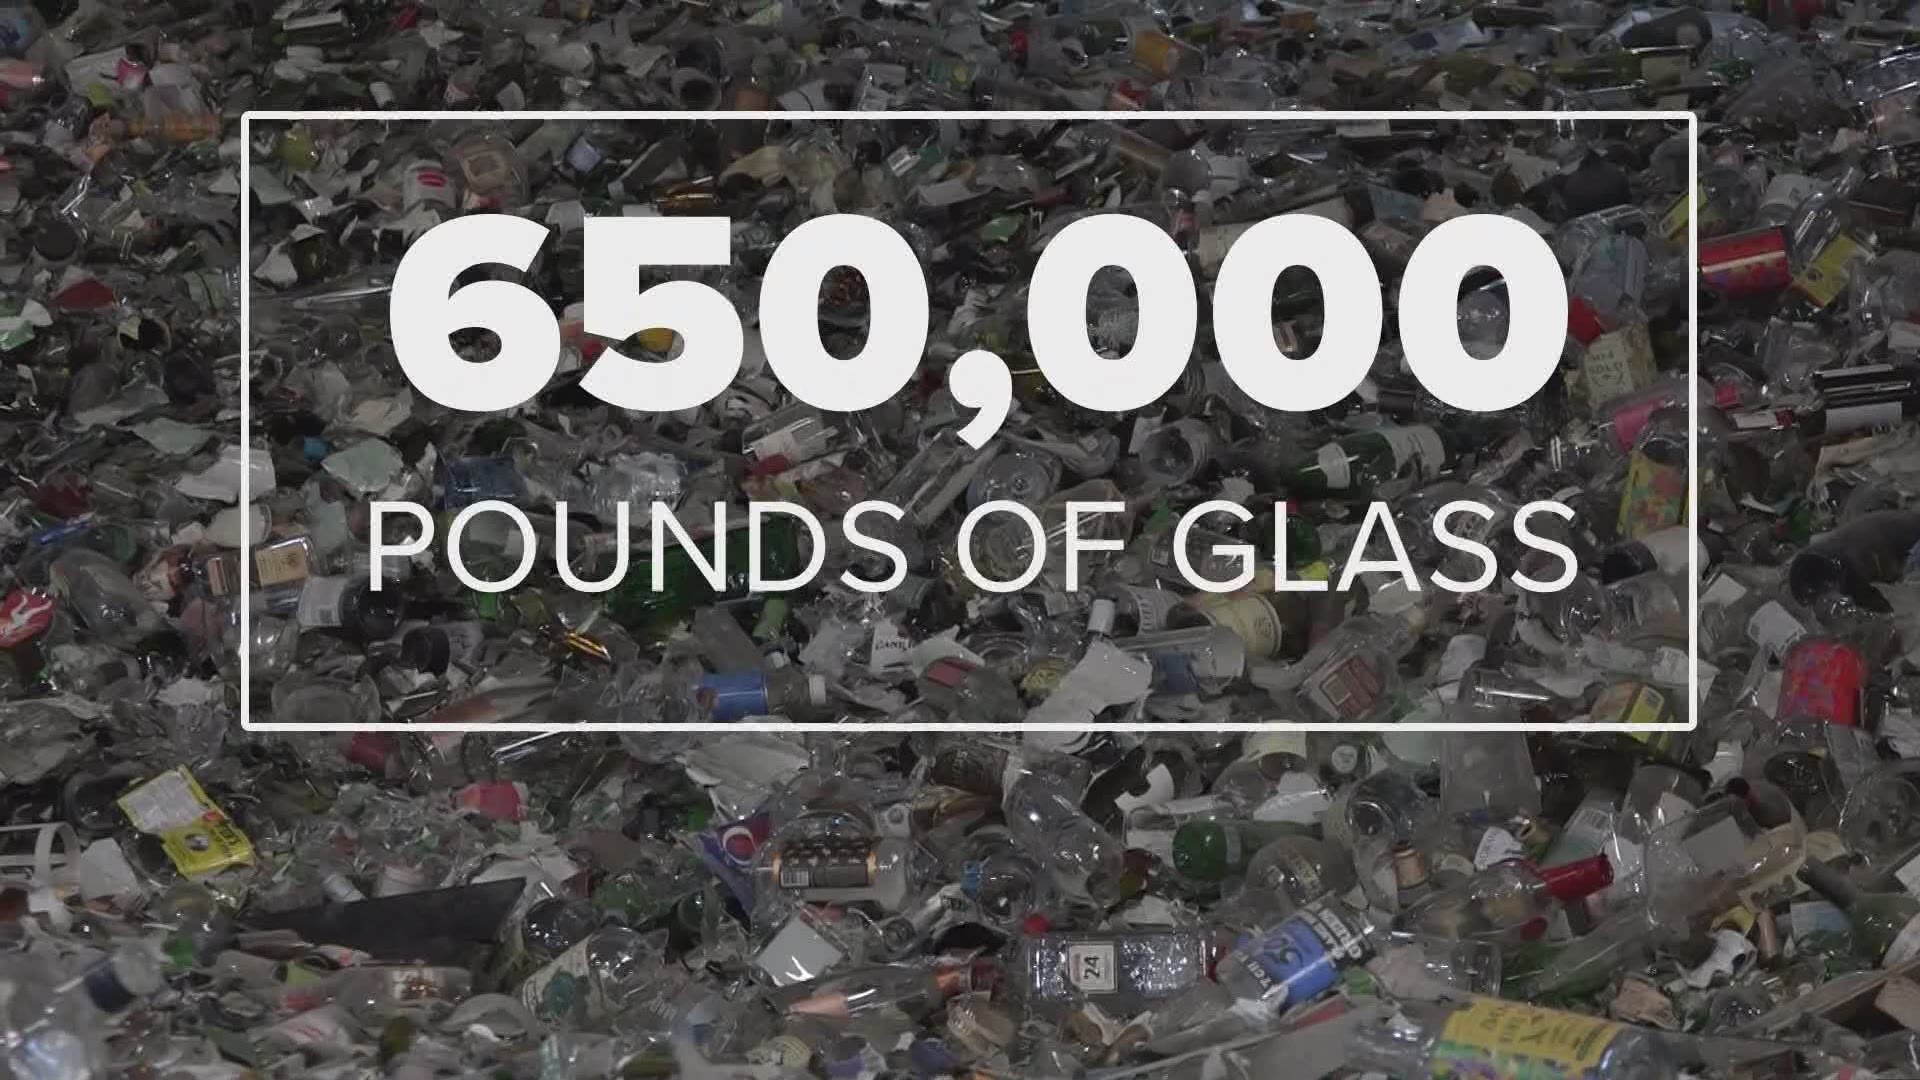 A local glass recycling program has made an impact in its year of existence and hopes to continue making a difference.